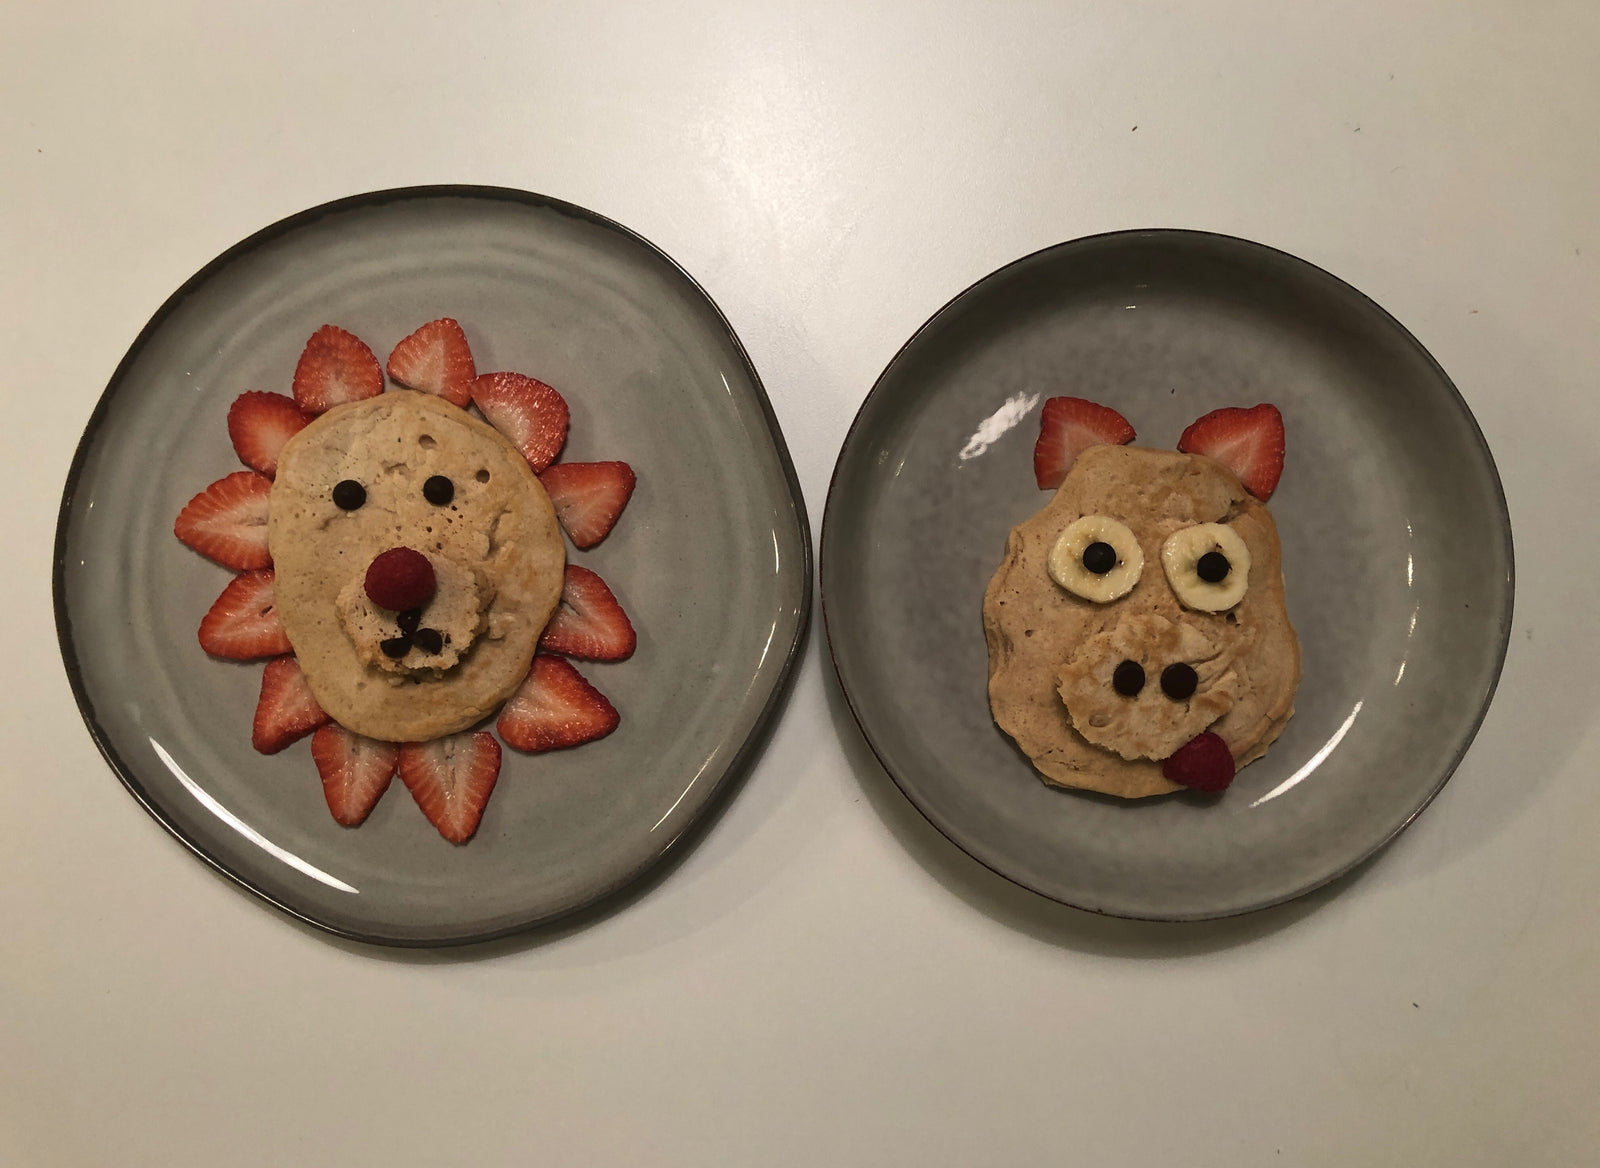 Plates with food art of a pig and lion made out of pancakes and fruit